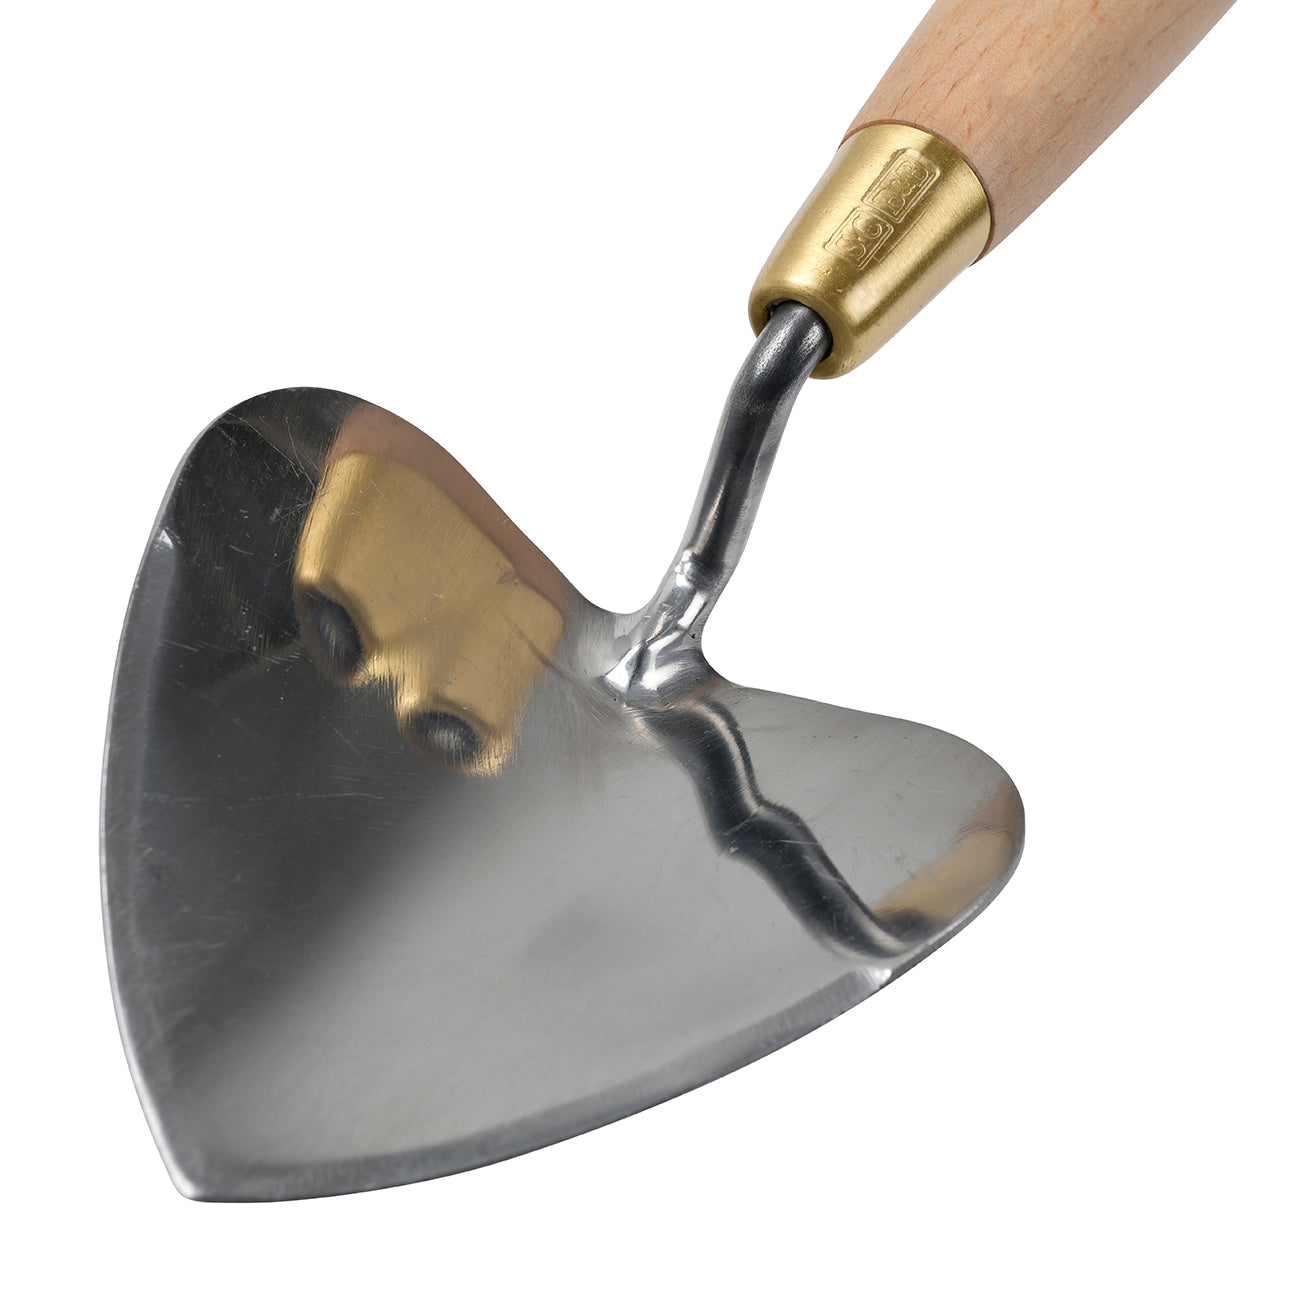 Mirror-Polished Stainless Steel Trowel